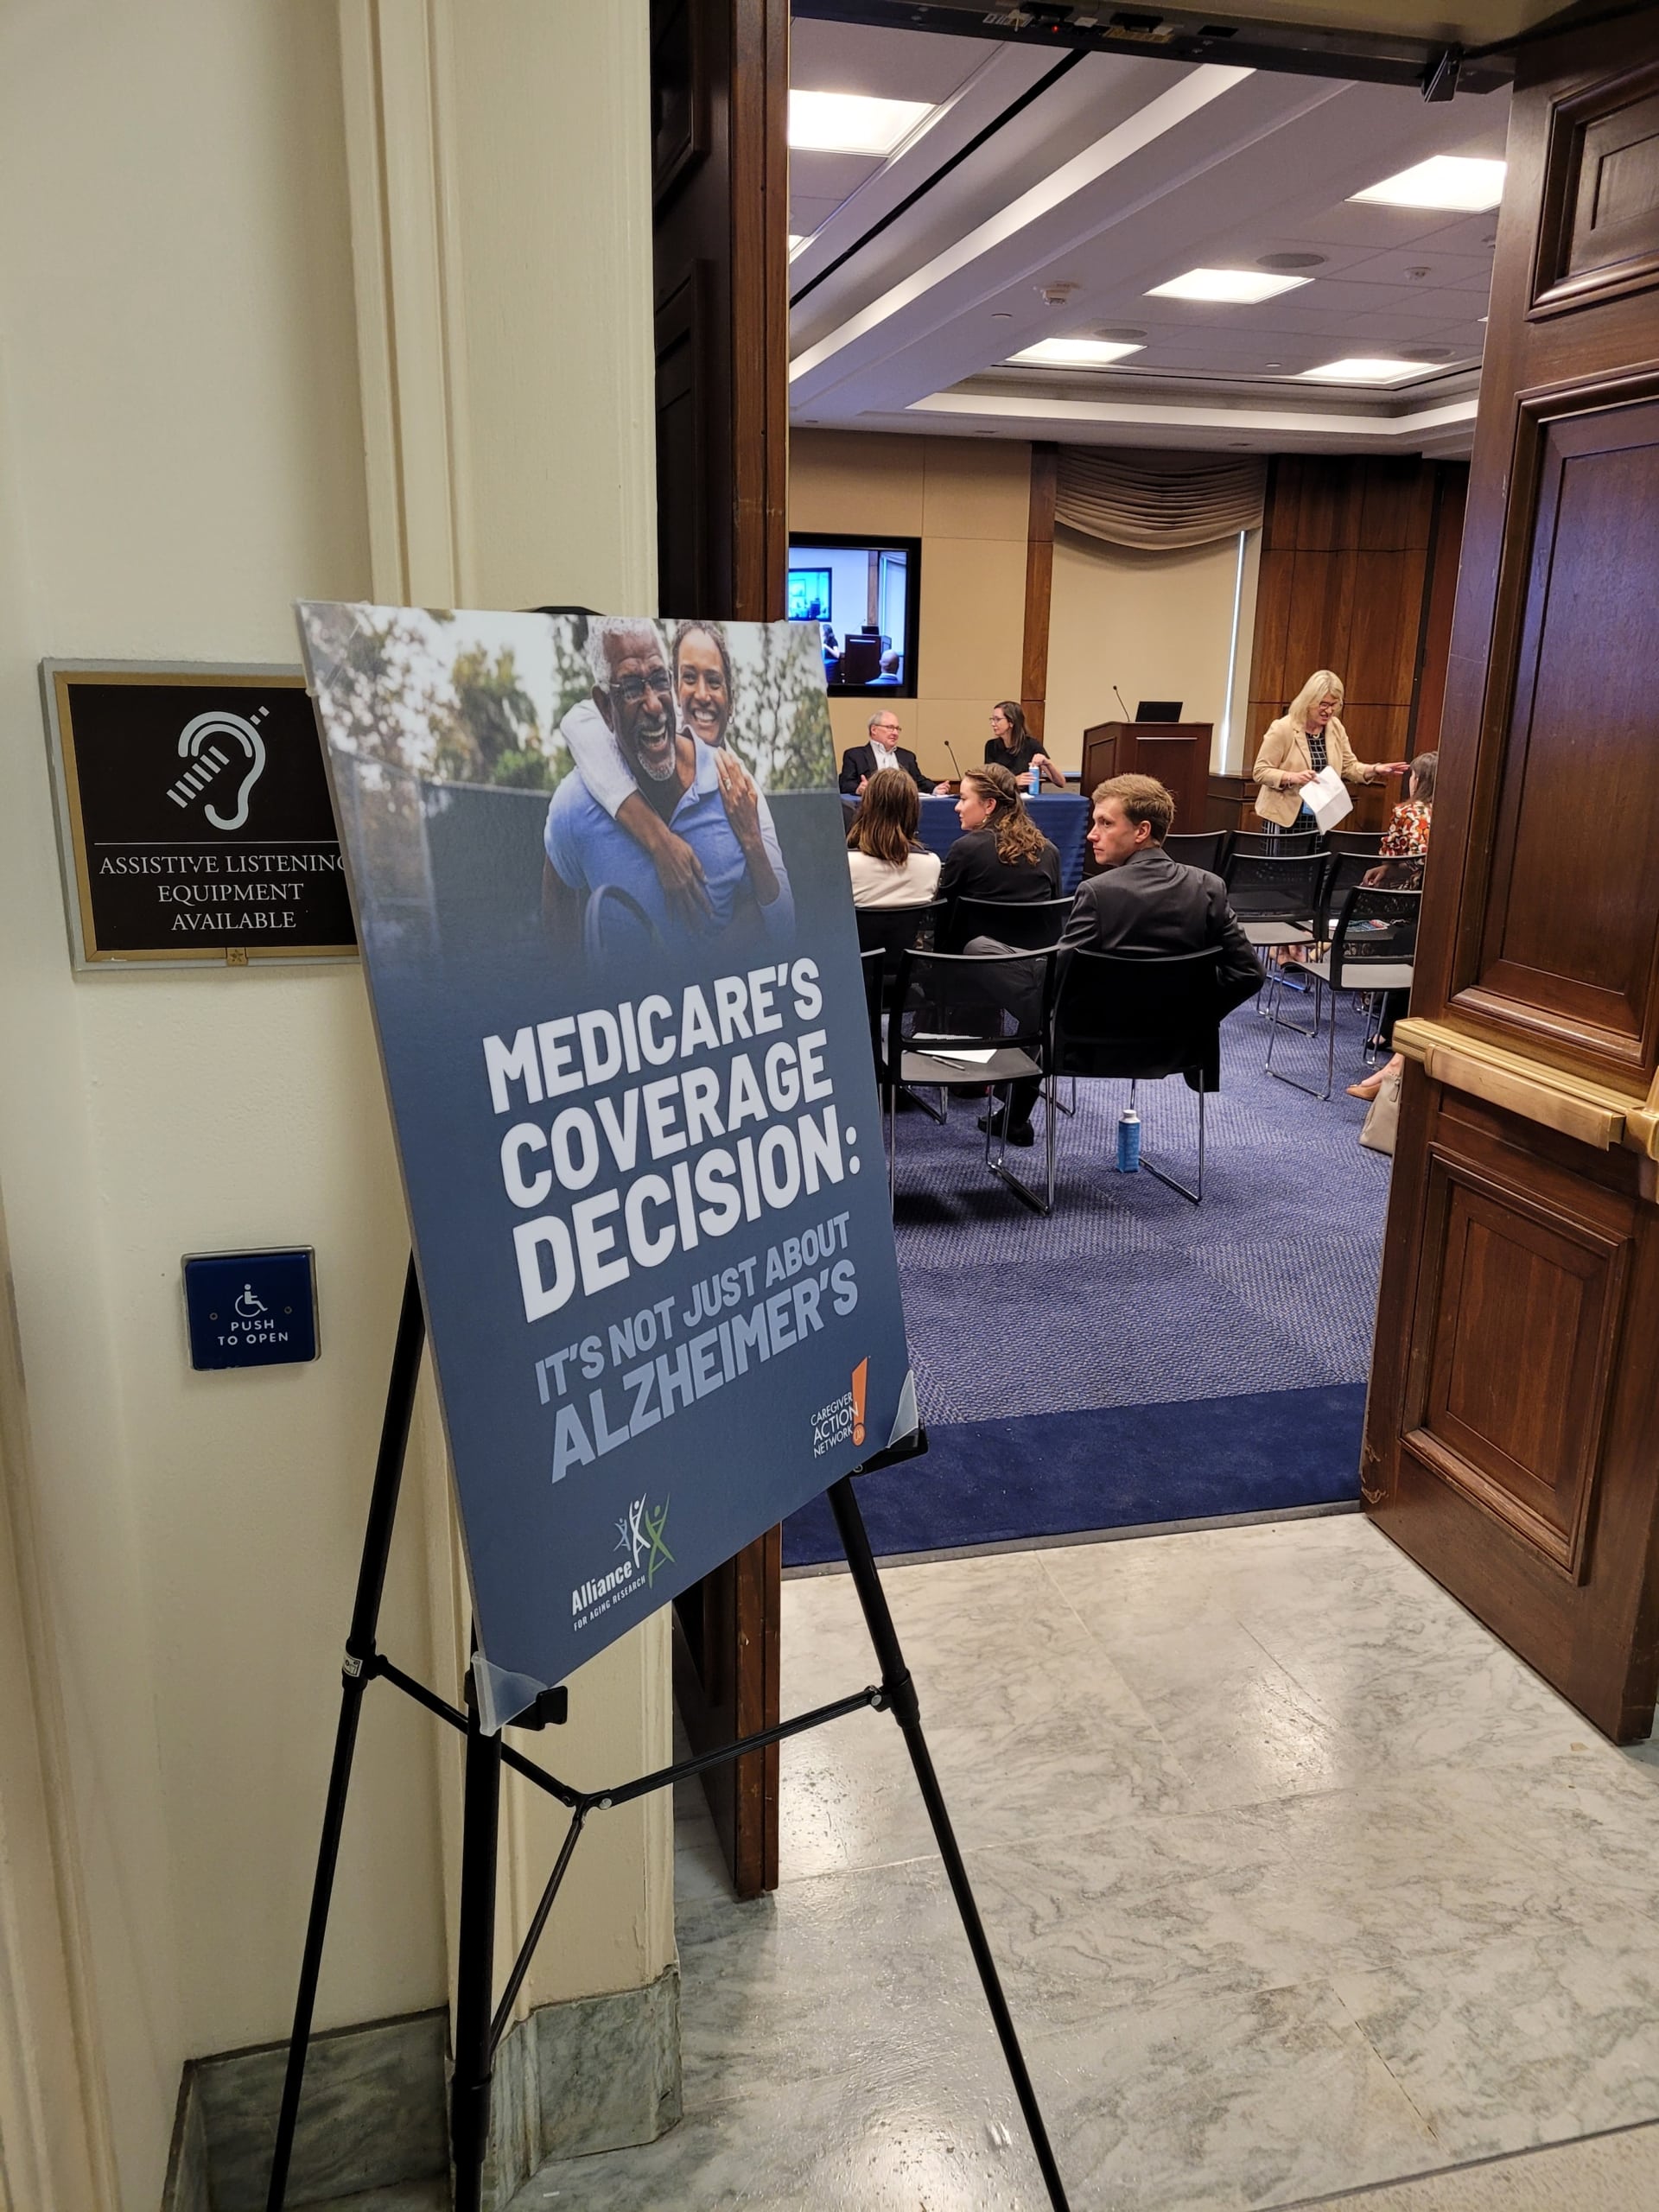 A sign outside the July 11 Hill staffer briefing reads "Medicare's Coverage Decision: It's Not Just About Alzheimer's."